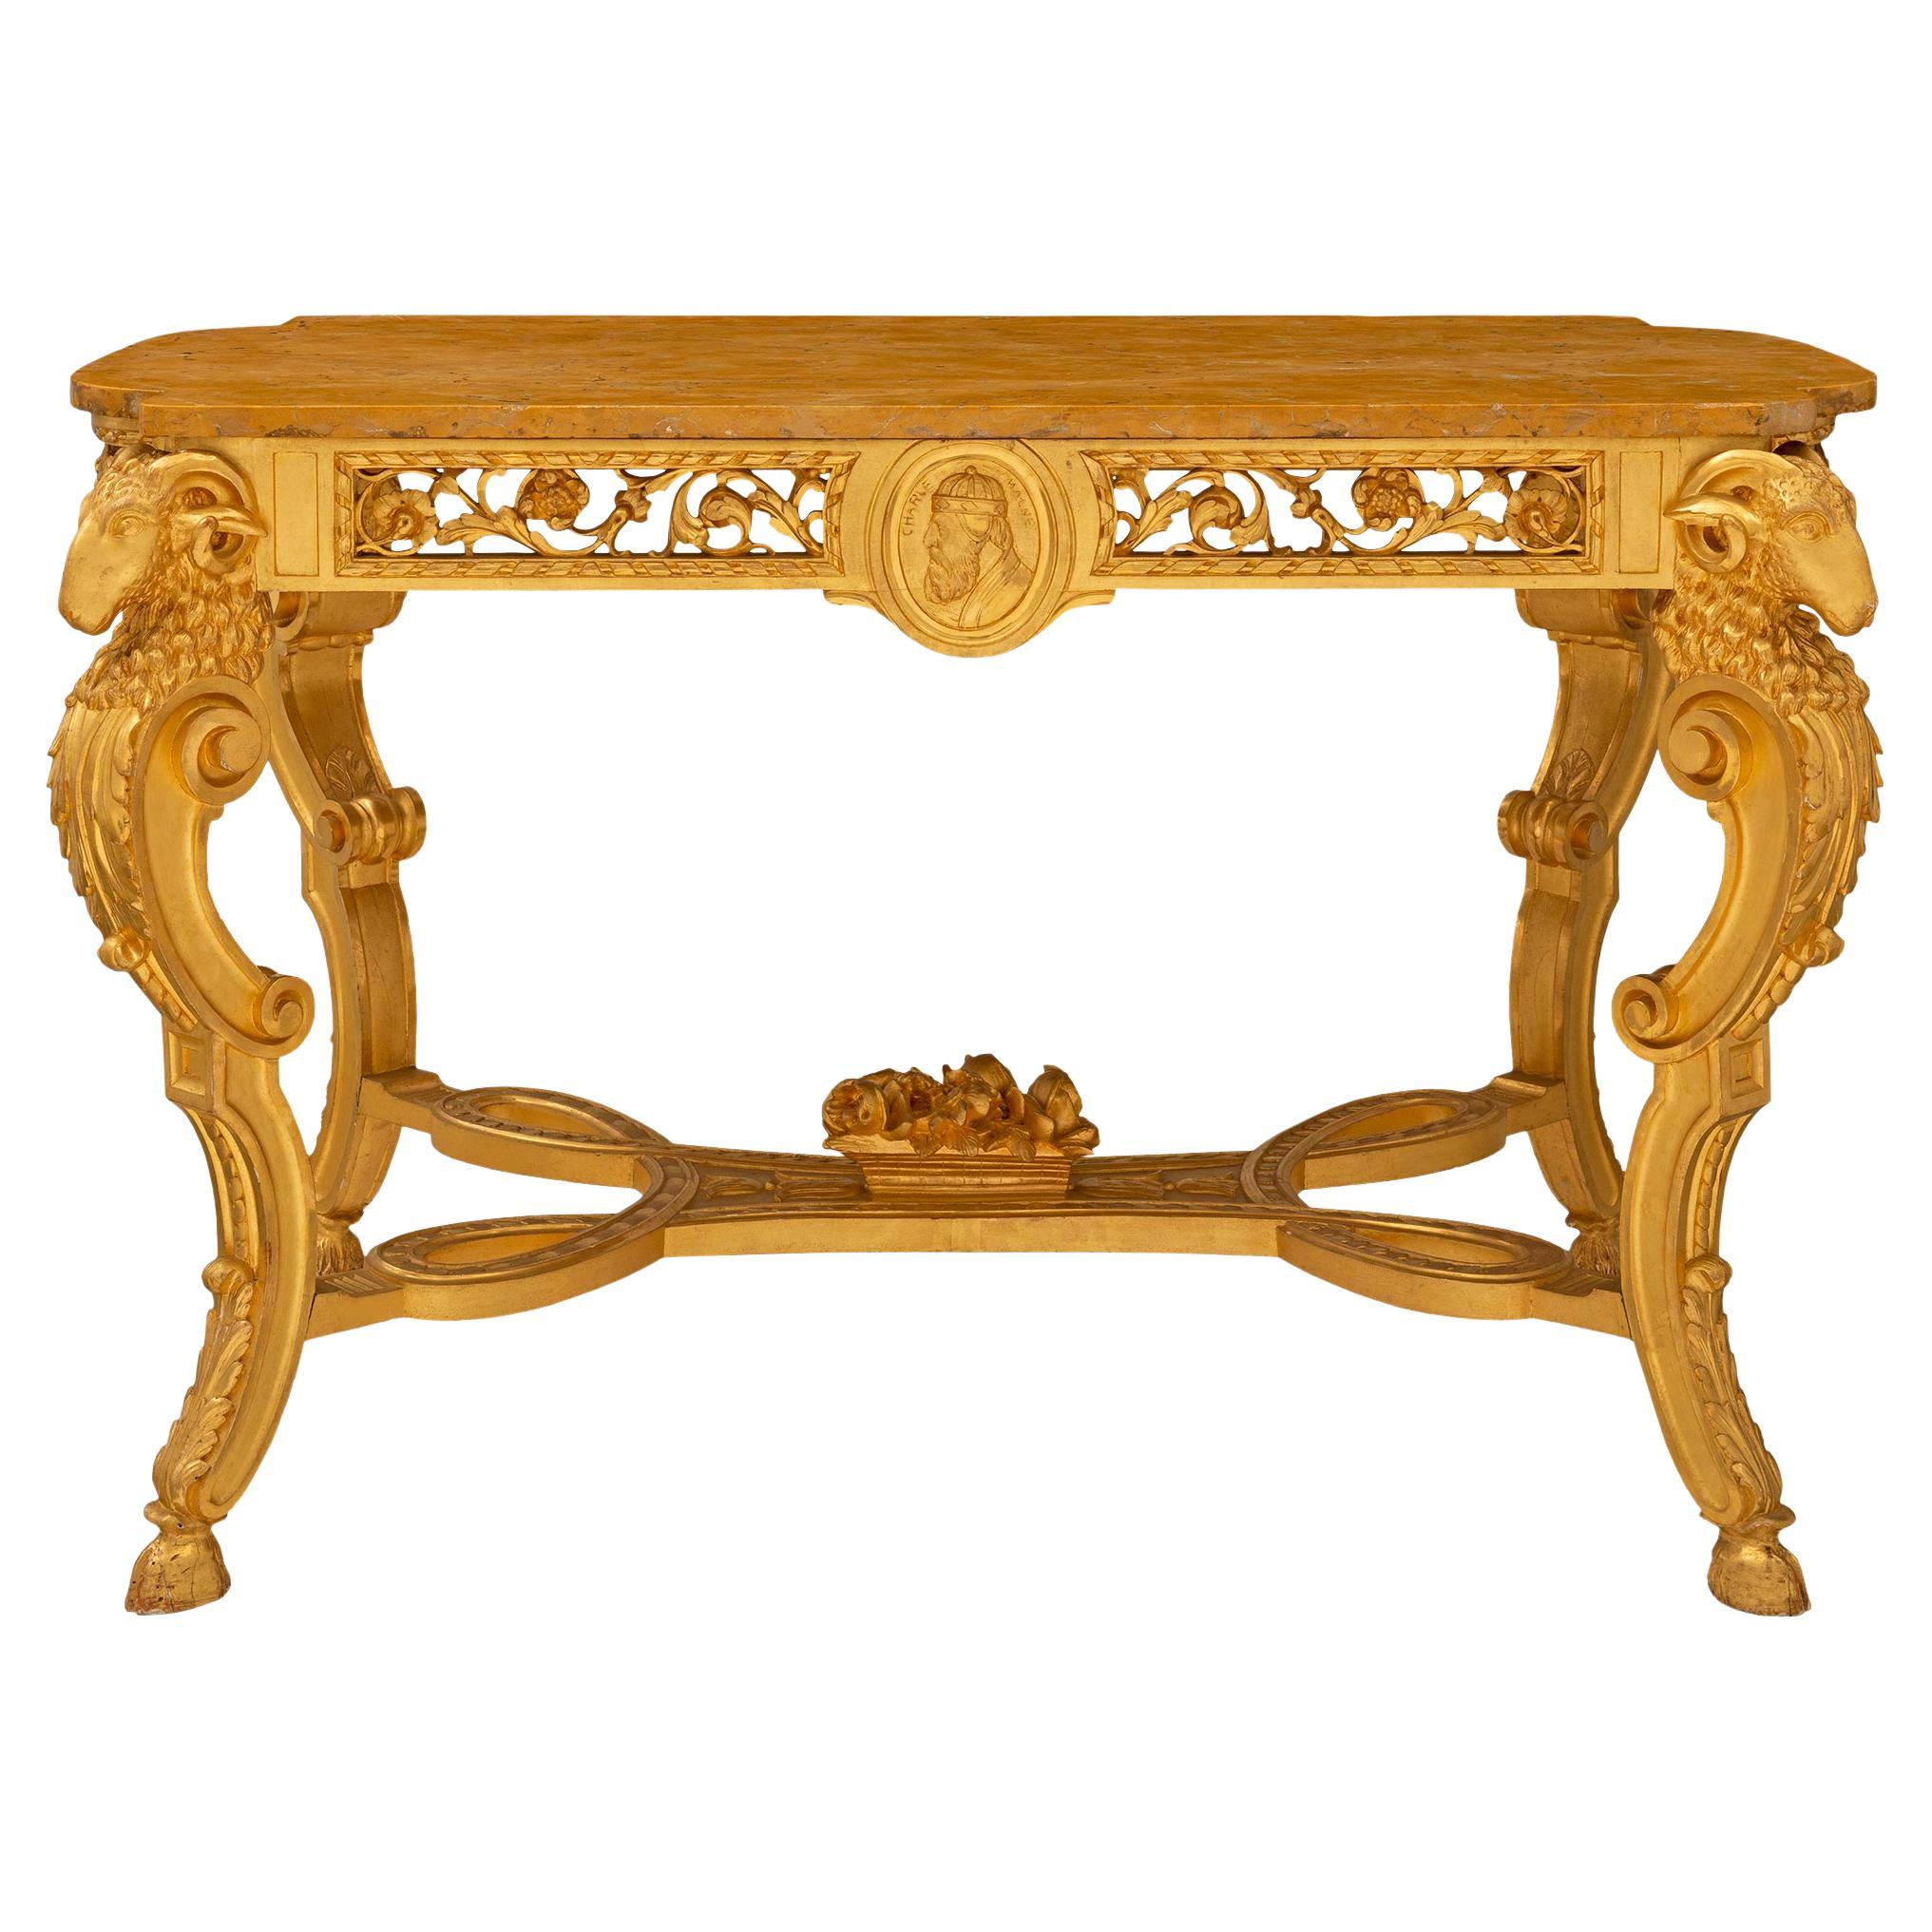 Italian 19th Century Giltwood and Giallo Reale Marble Center Table For Sale